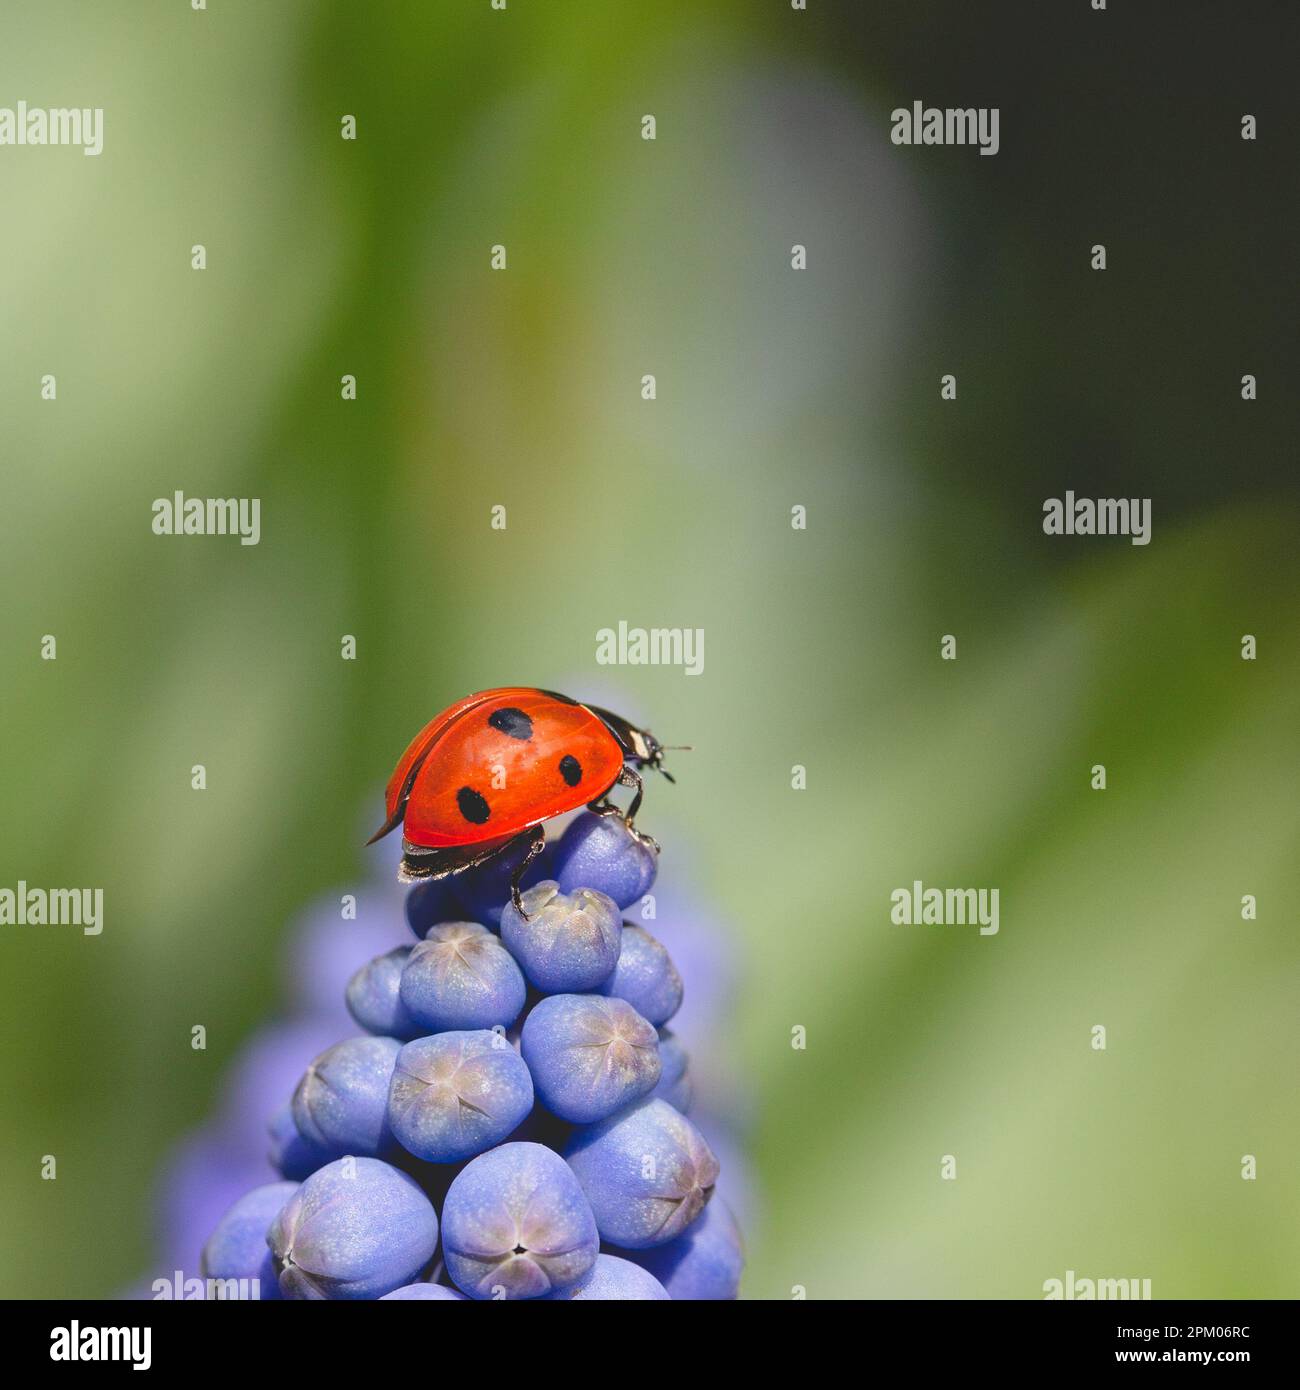 Close up macro photography of a red Ladybird or Ladybug climbing on a blue Muscari flower head in Spring with copy space Stock Photo